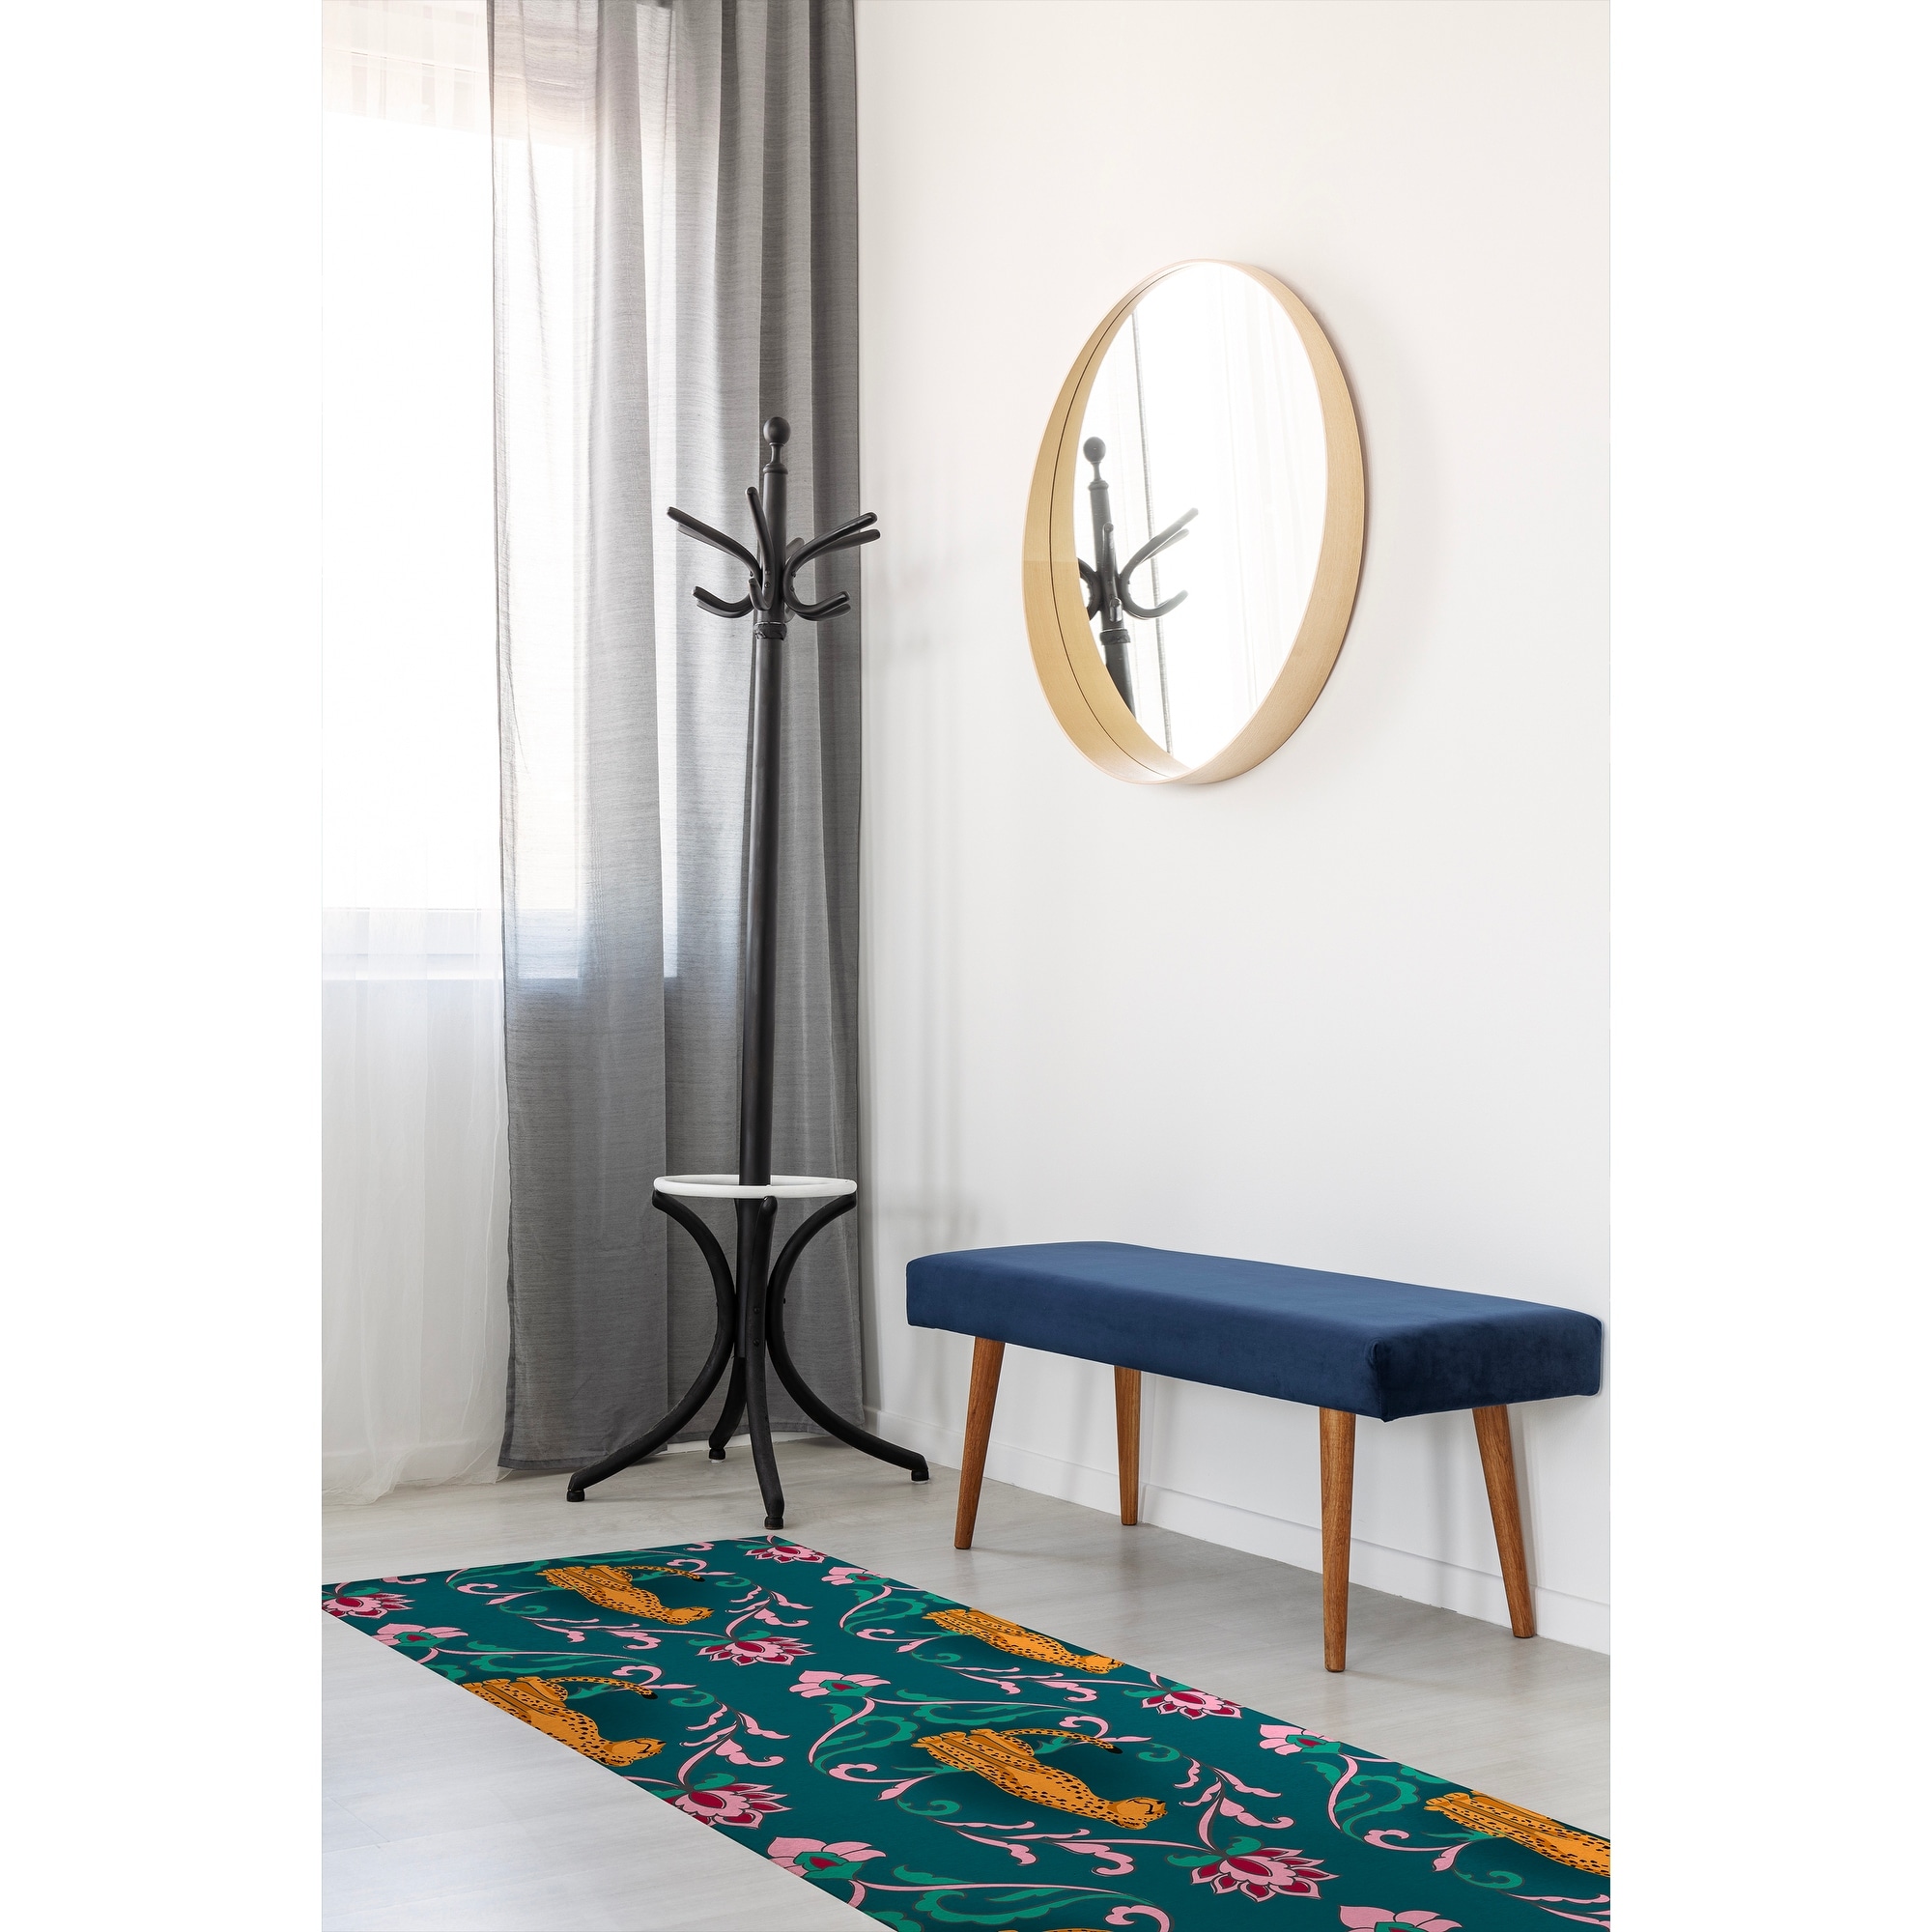 WILD CAT TEAL Area Rug By Kavka Designs